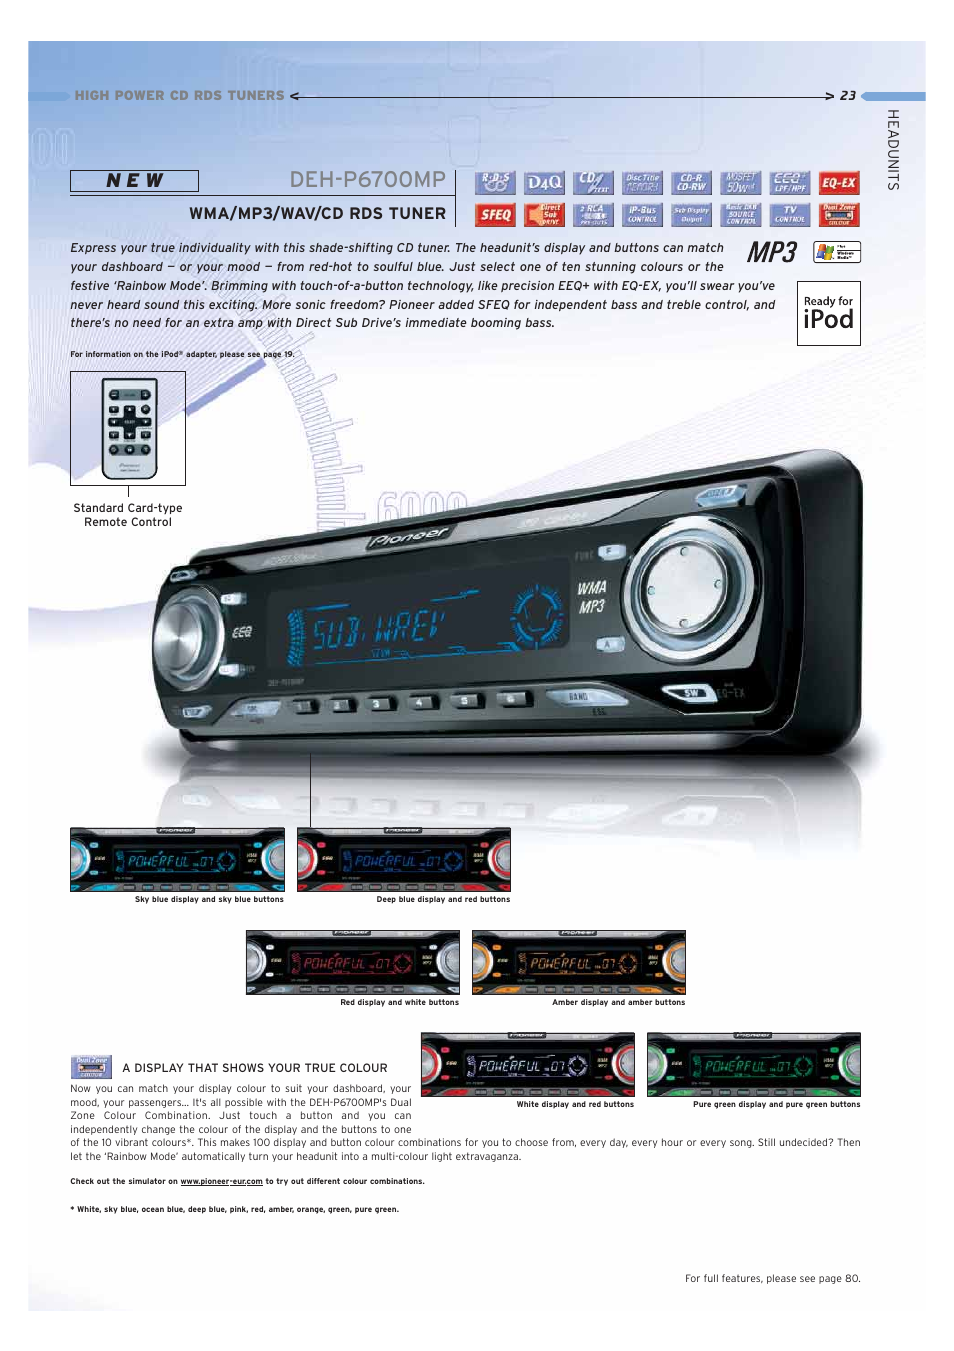 Deh-p6700mp, N e w, Wma/mp3/wav/cd rds tuner | Pioneer Car CD MP3 Player  User Manual | Page 23 / 39